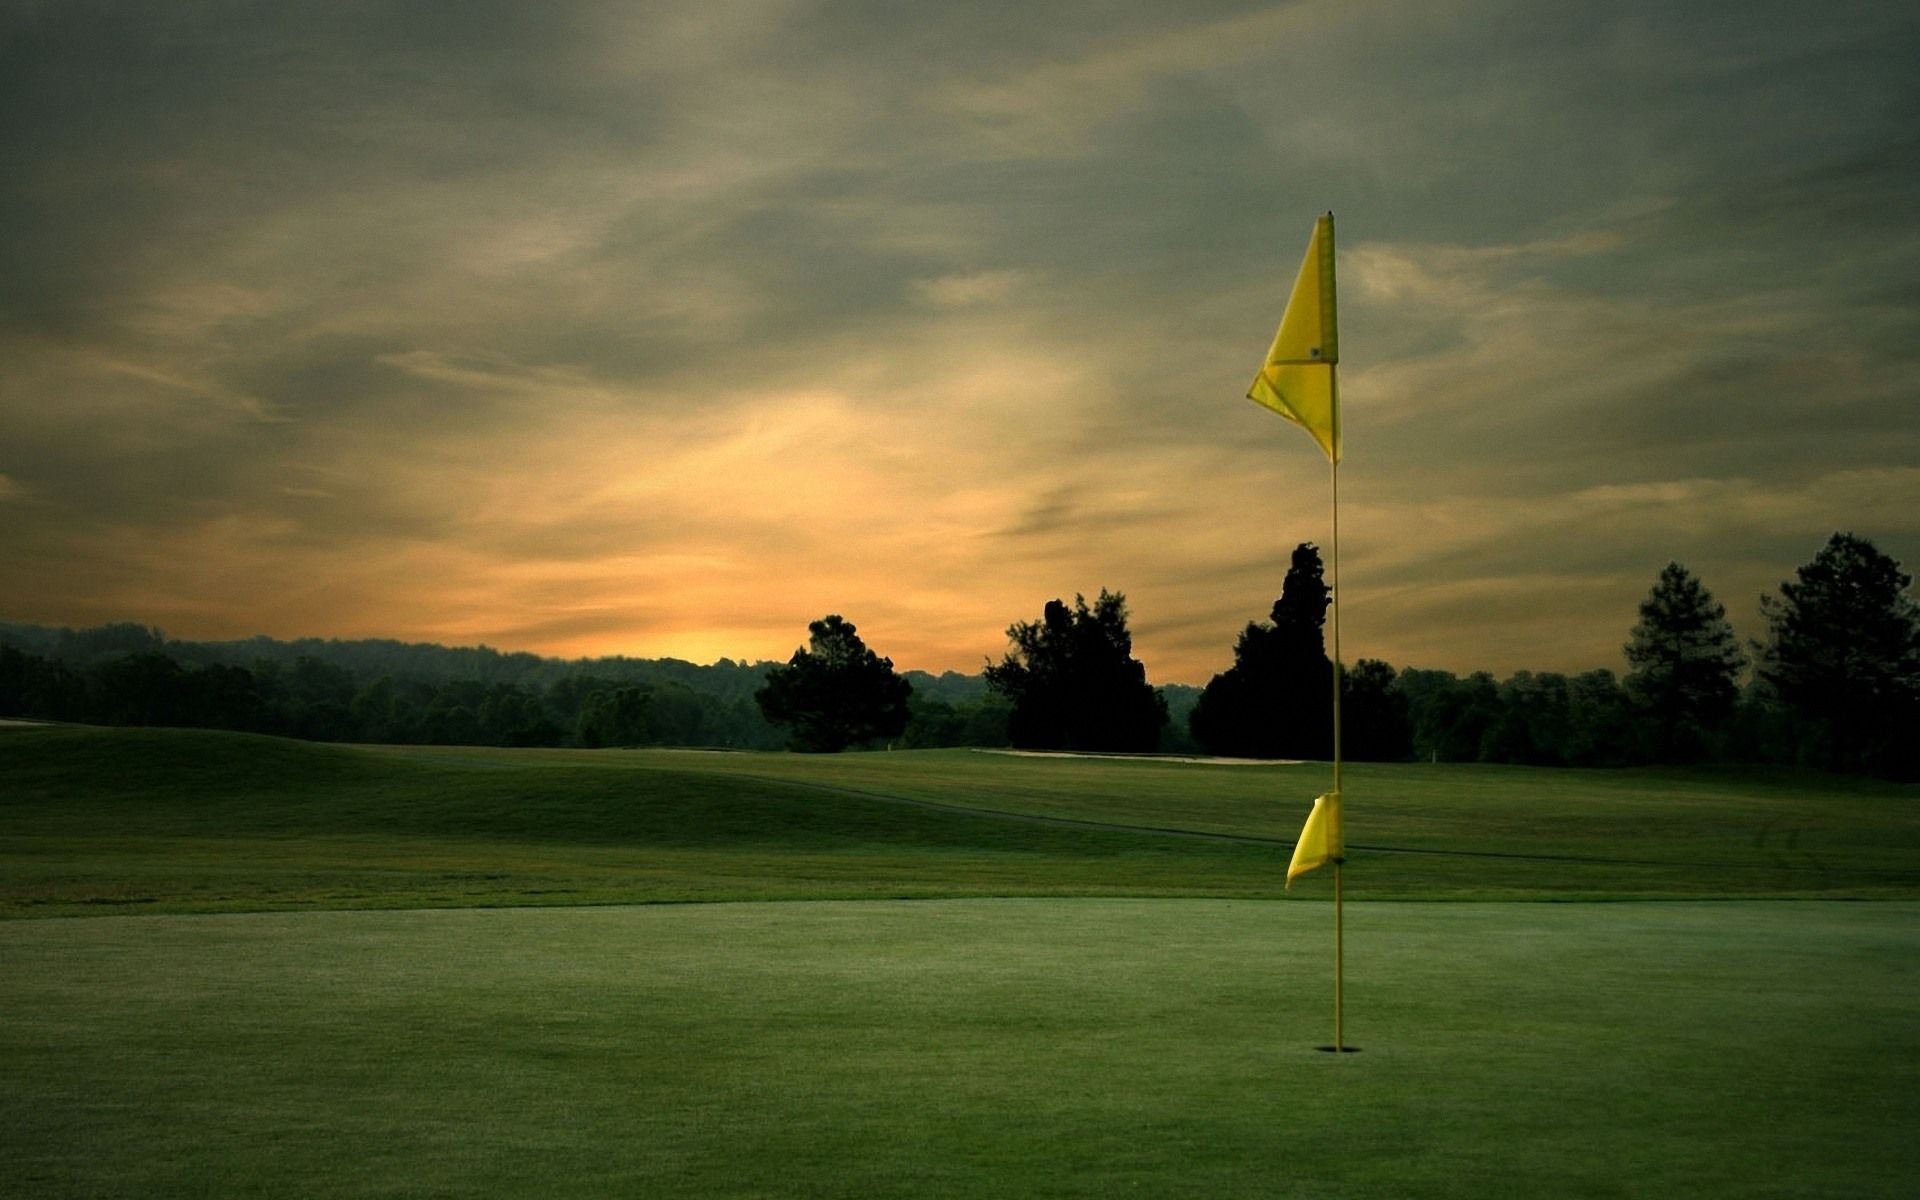 Golf Course: Flag, Green, Area of field around the hole with very short grass, for putting games. 1920x1200 HD Wallpaper.